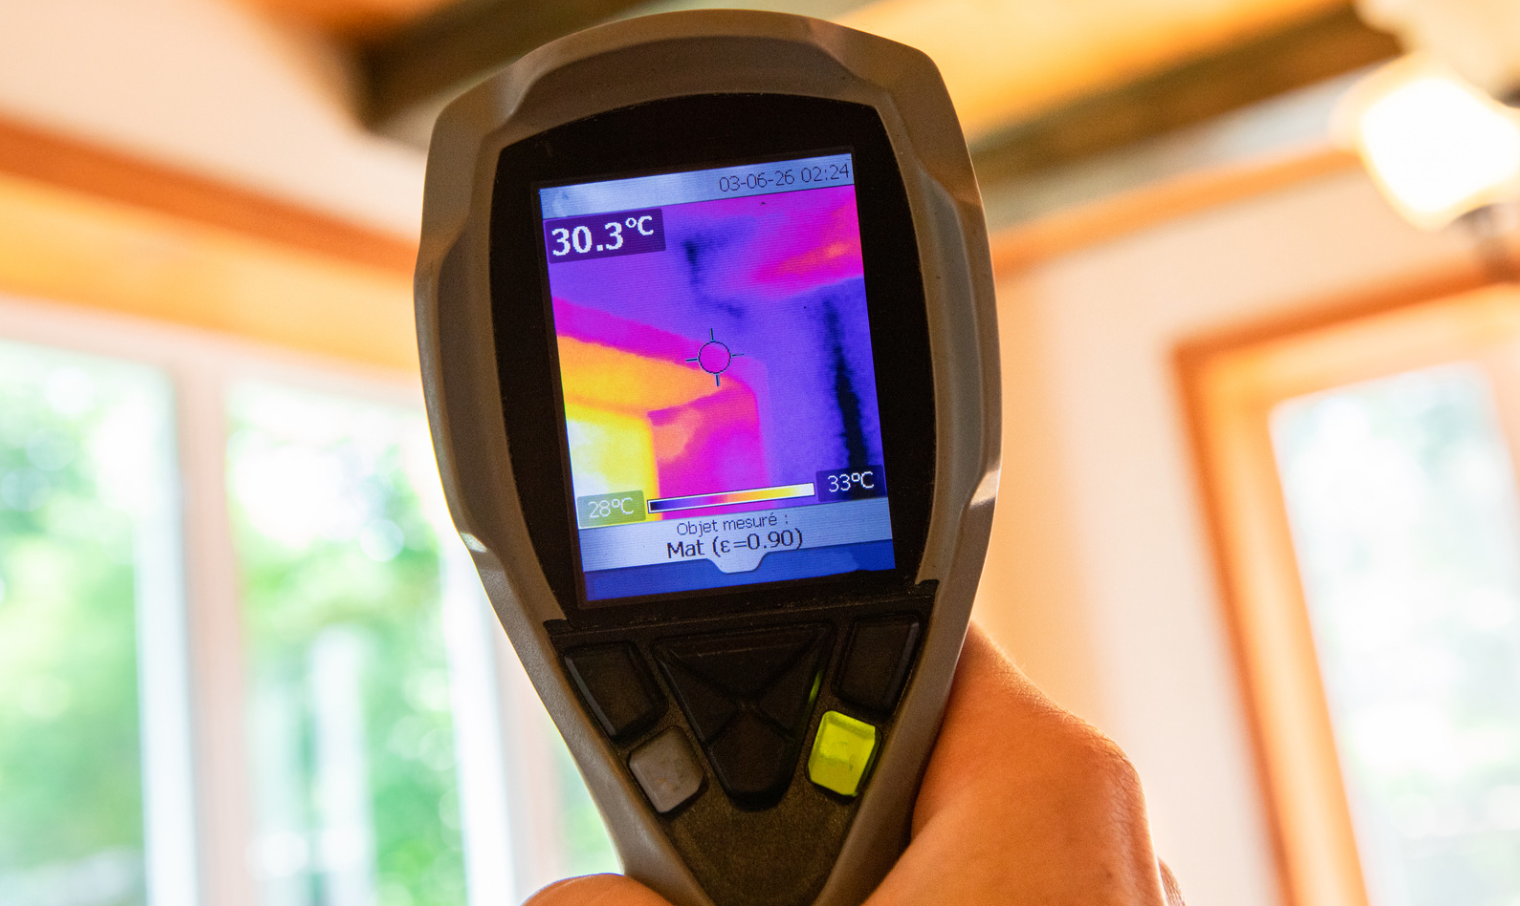 Thermal imaging camera being used in indoor air quality inspection